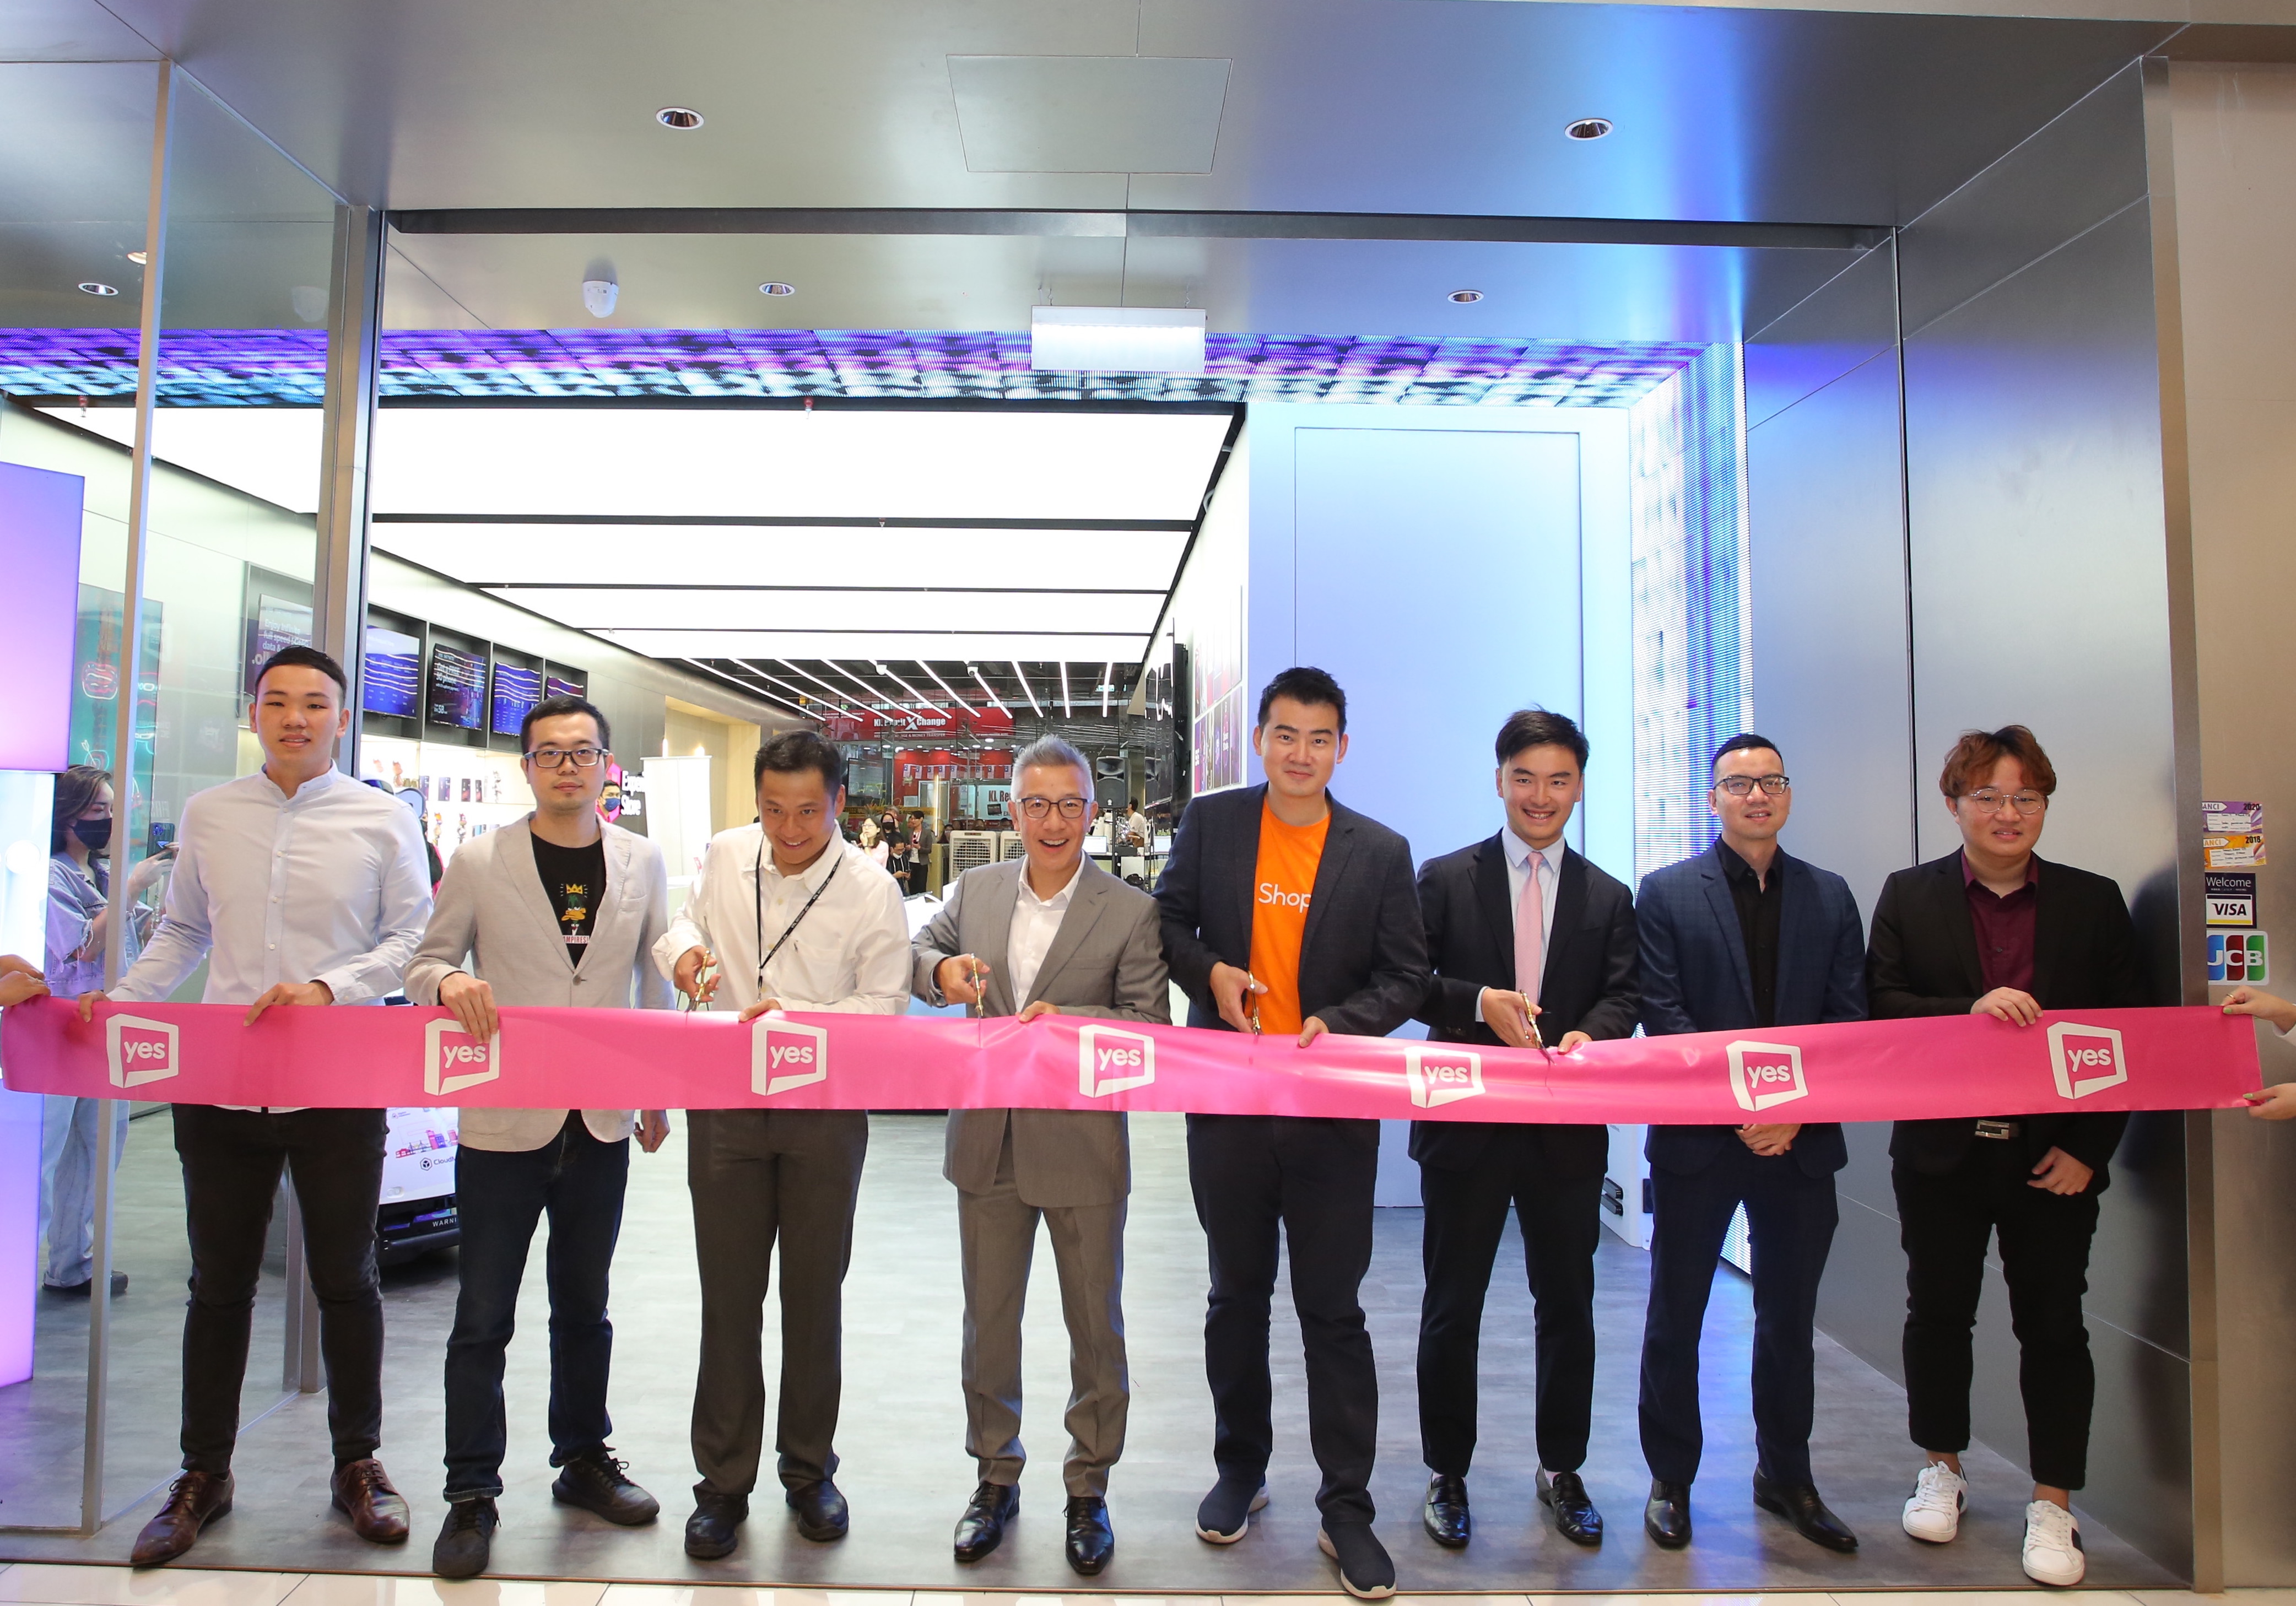 Yes Launches The First Experience Store Powered by 5G in Malaysia